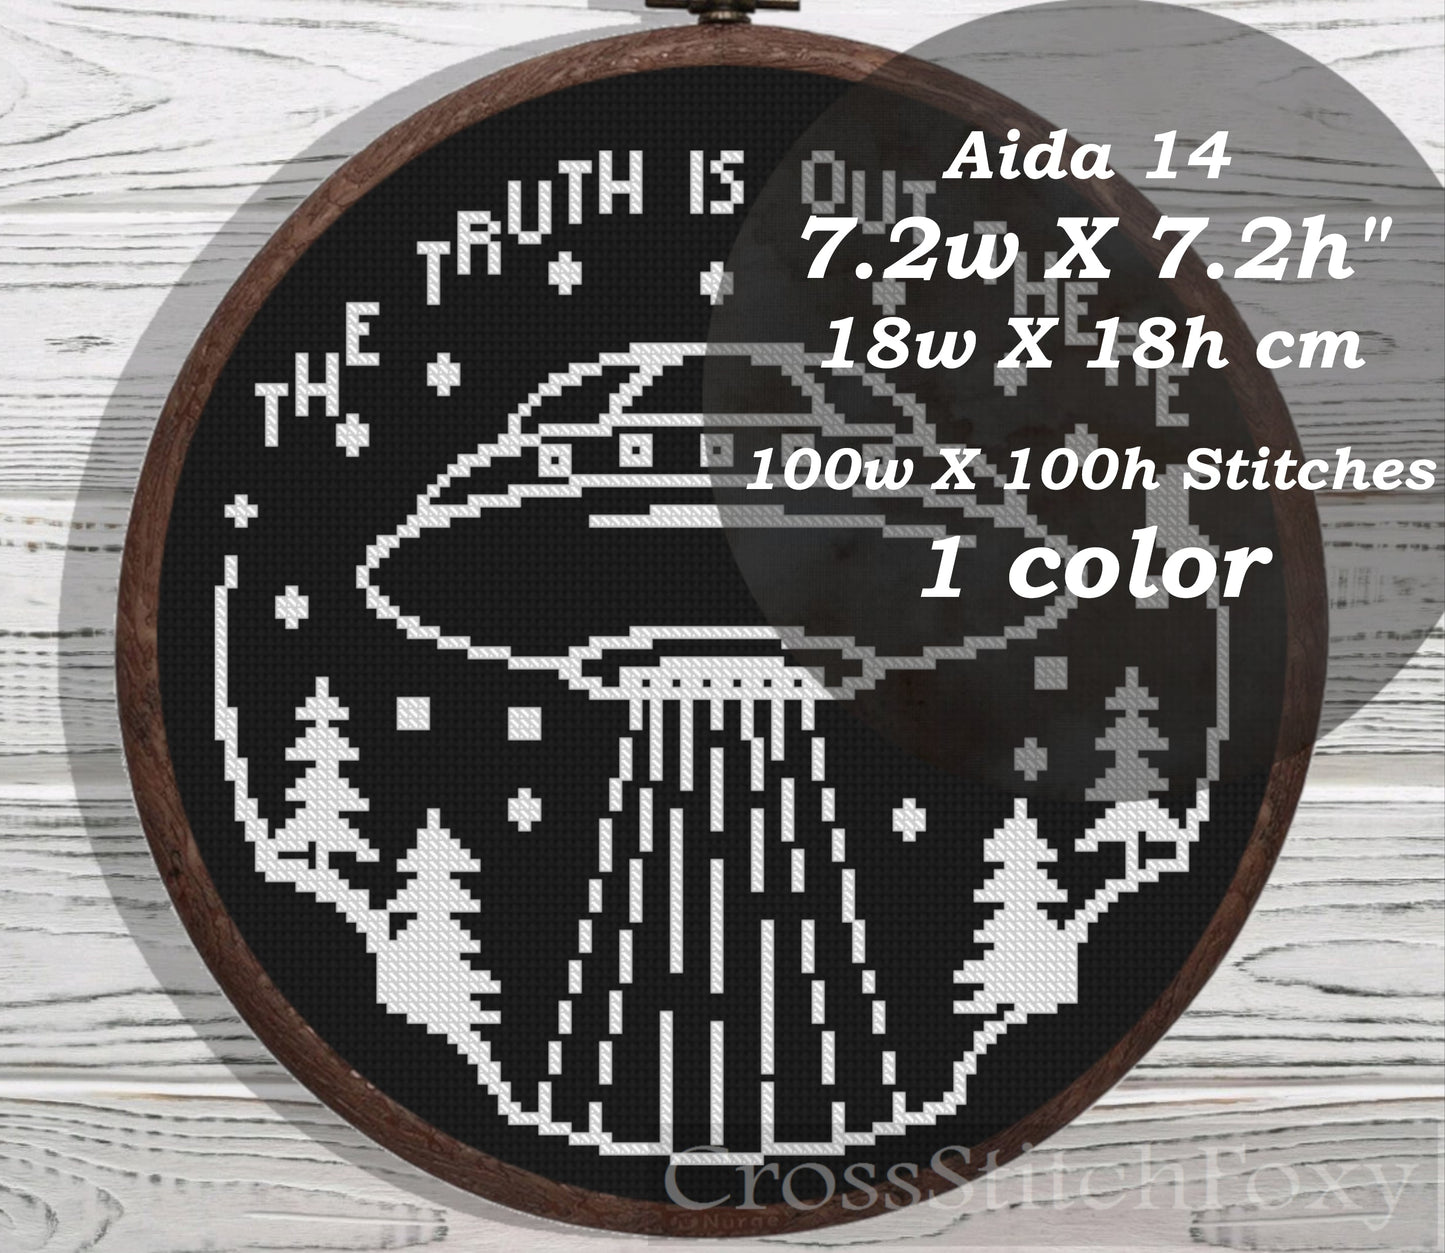 The Truth Is Out There cross stitch pattern